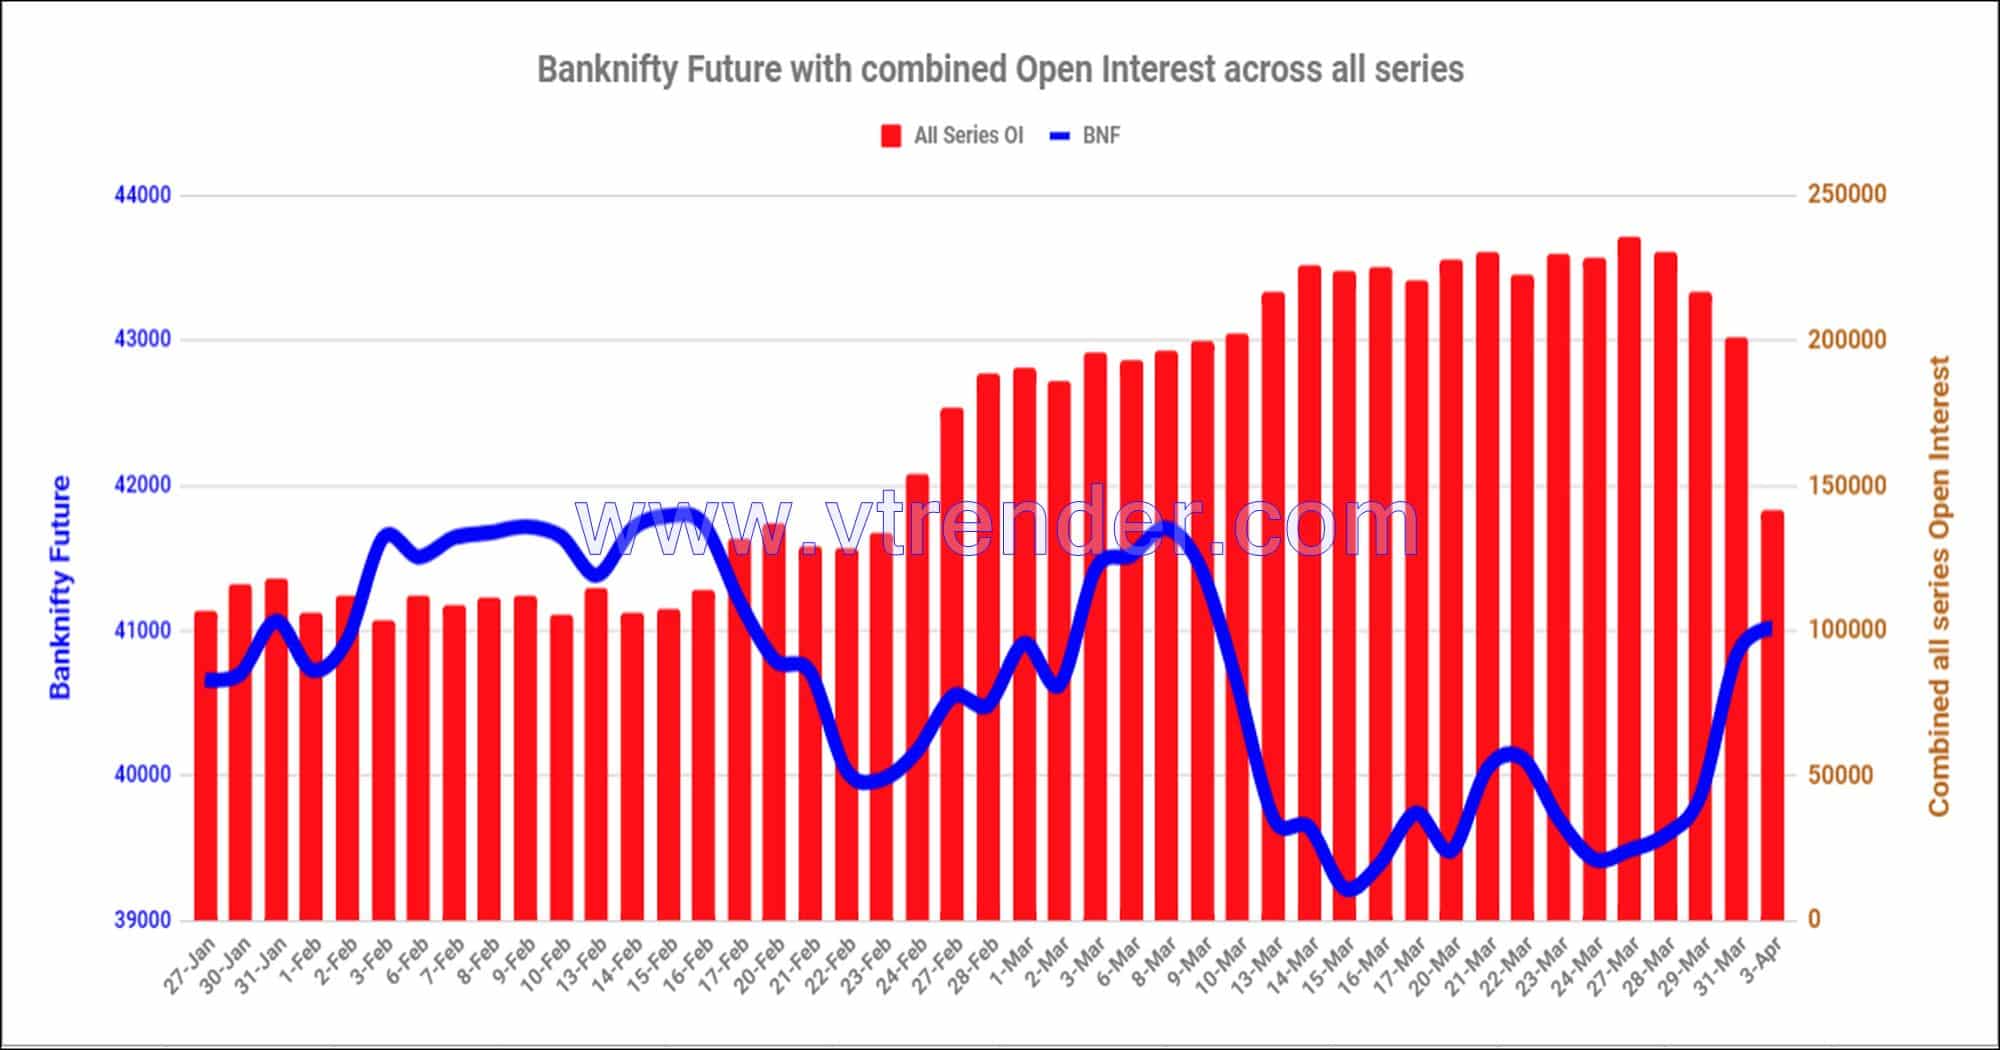 Bnf03Apr Nifty And Banknifty Futures With All Series Combined Open Interest – 3Rd Apr 2023 Banknifty, Nifty, Open Interest